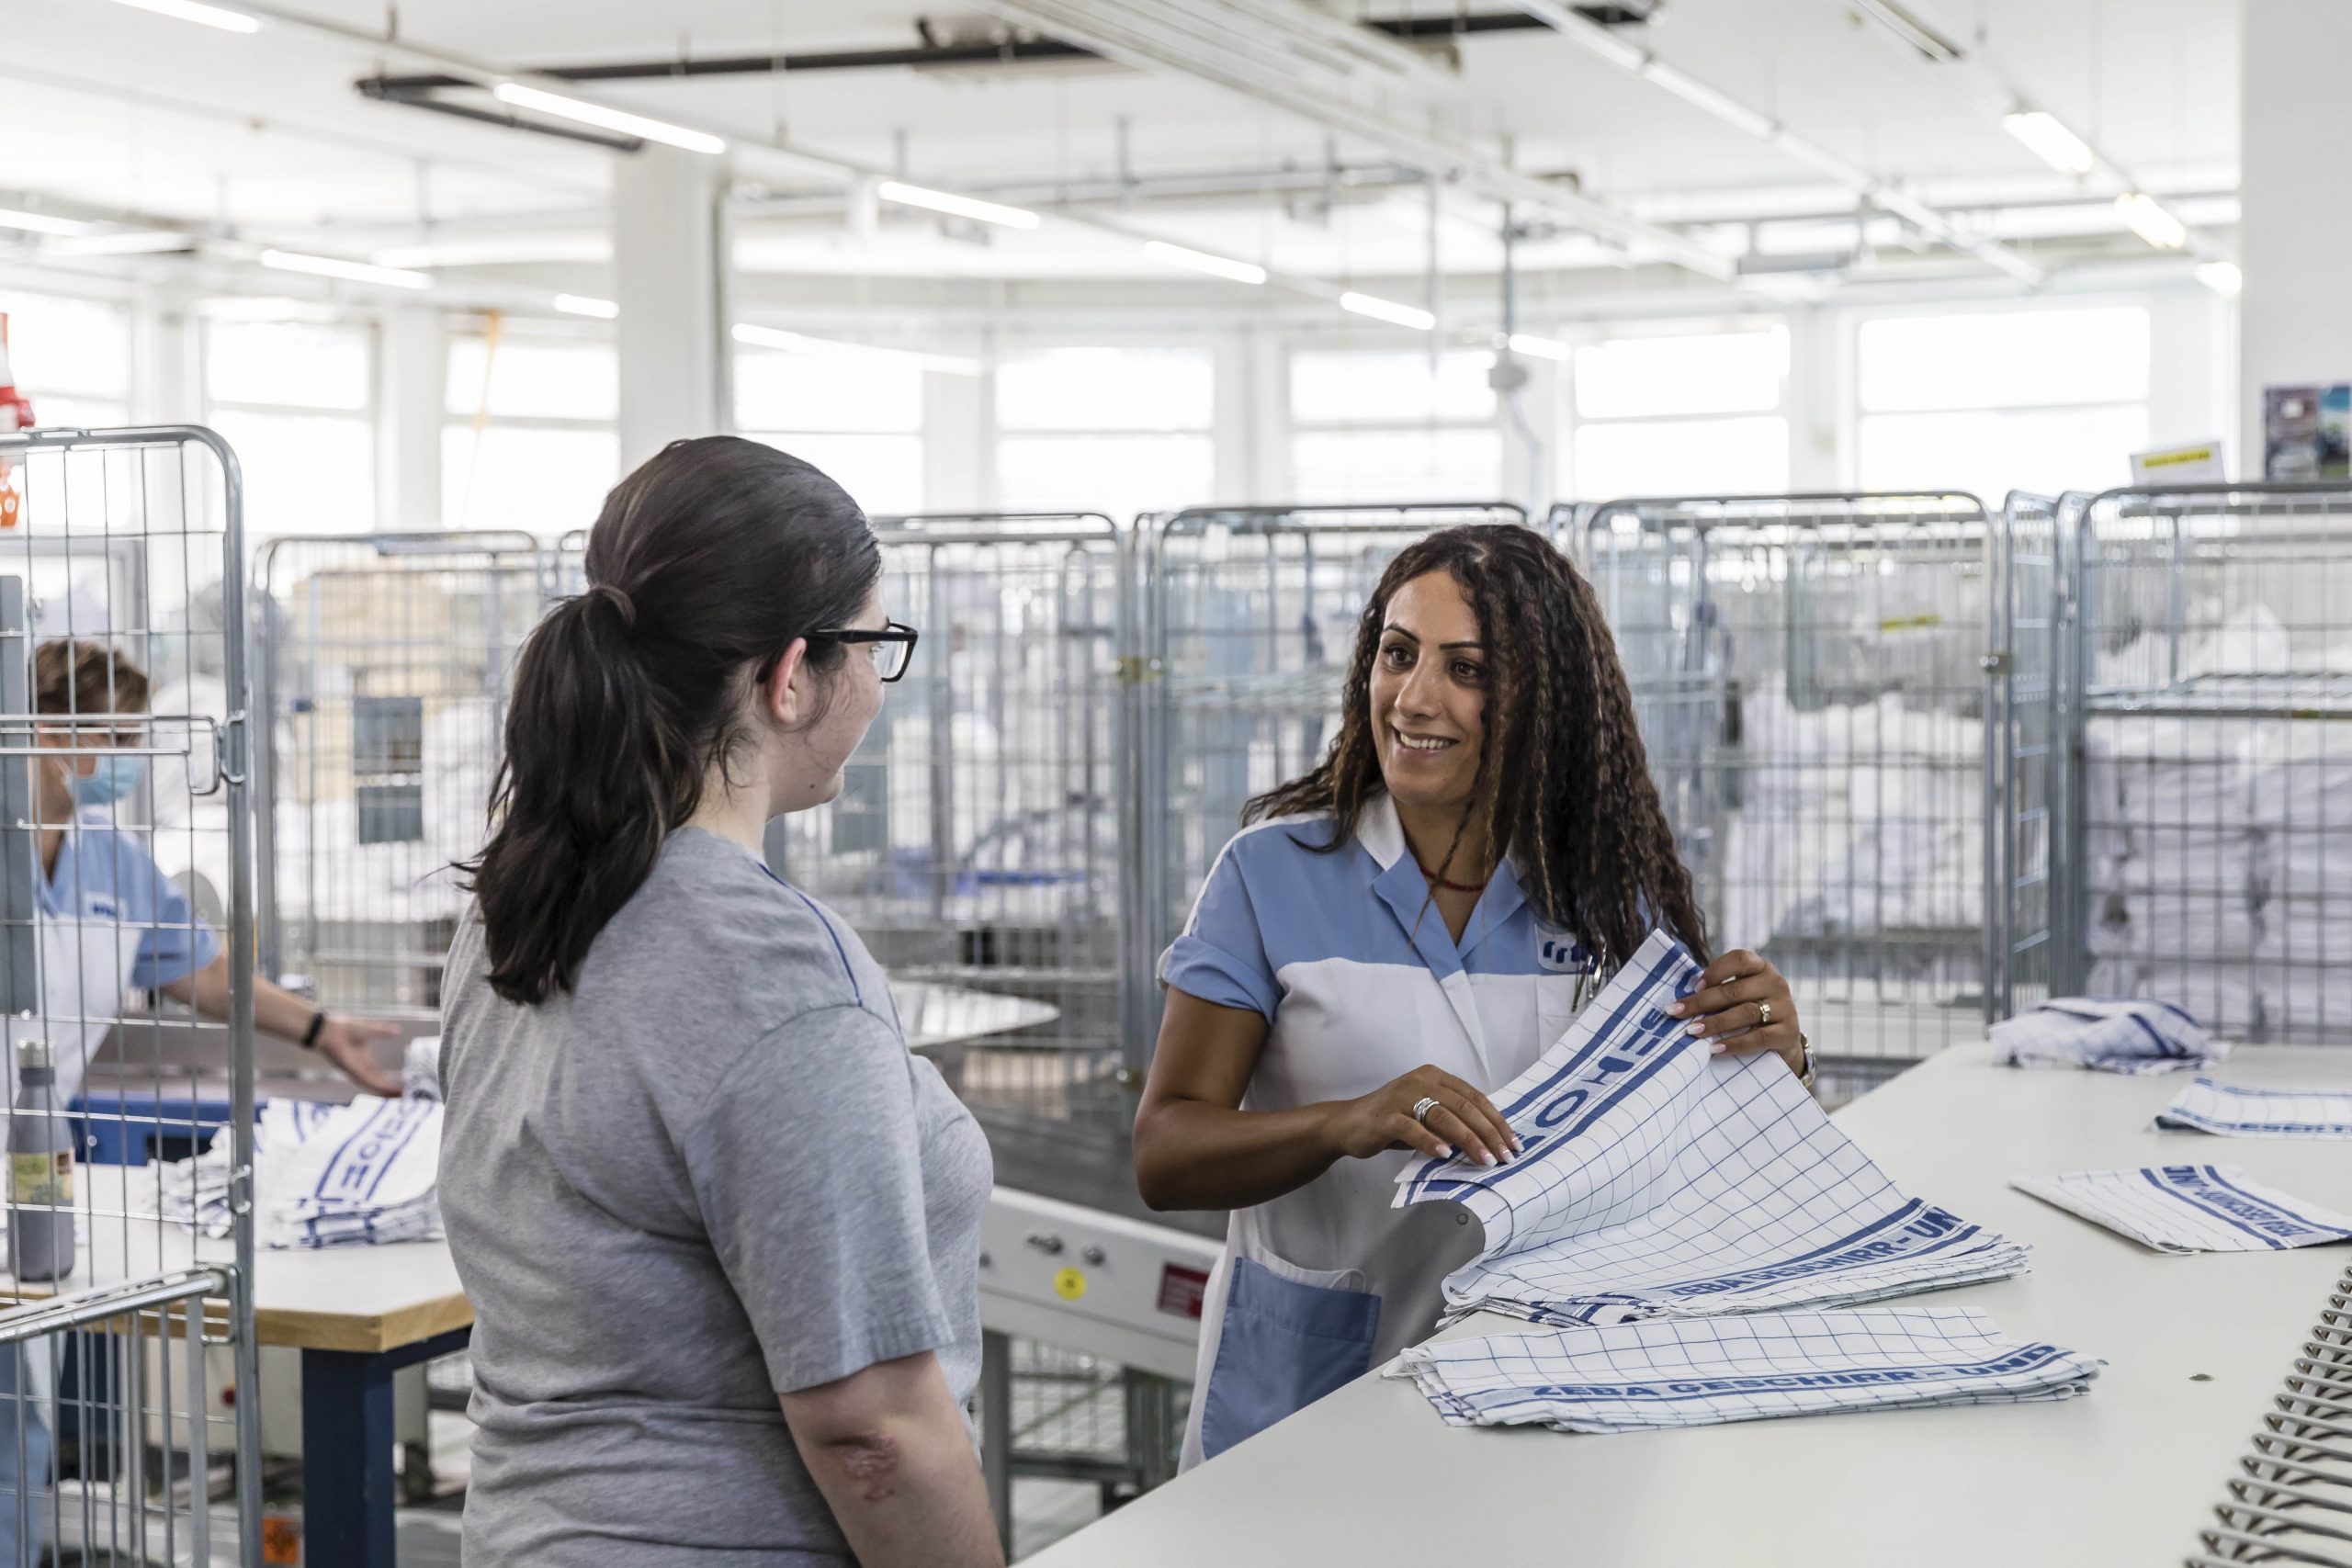 TSA adds another vital resource to help laundry industry support employee wellbeing